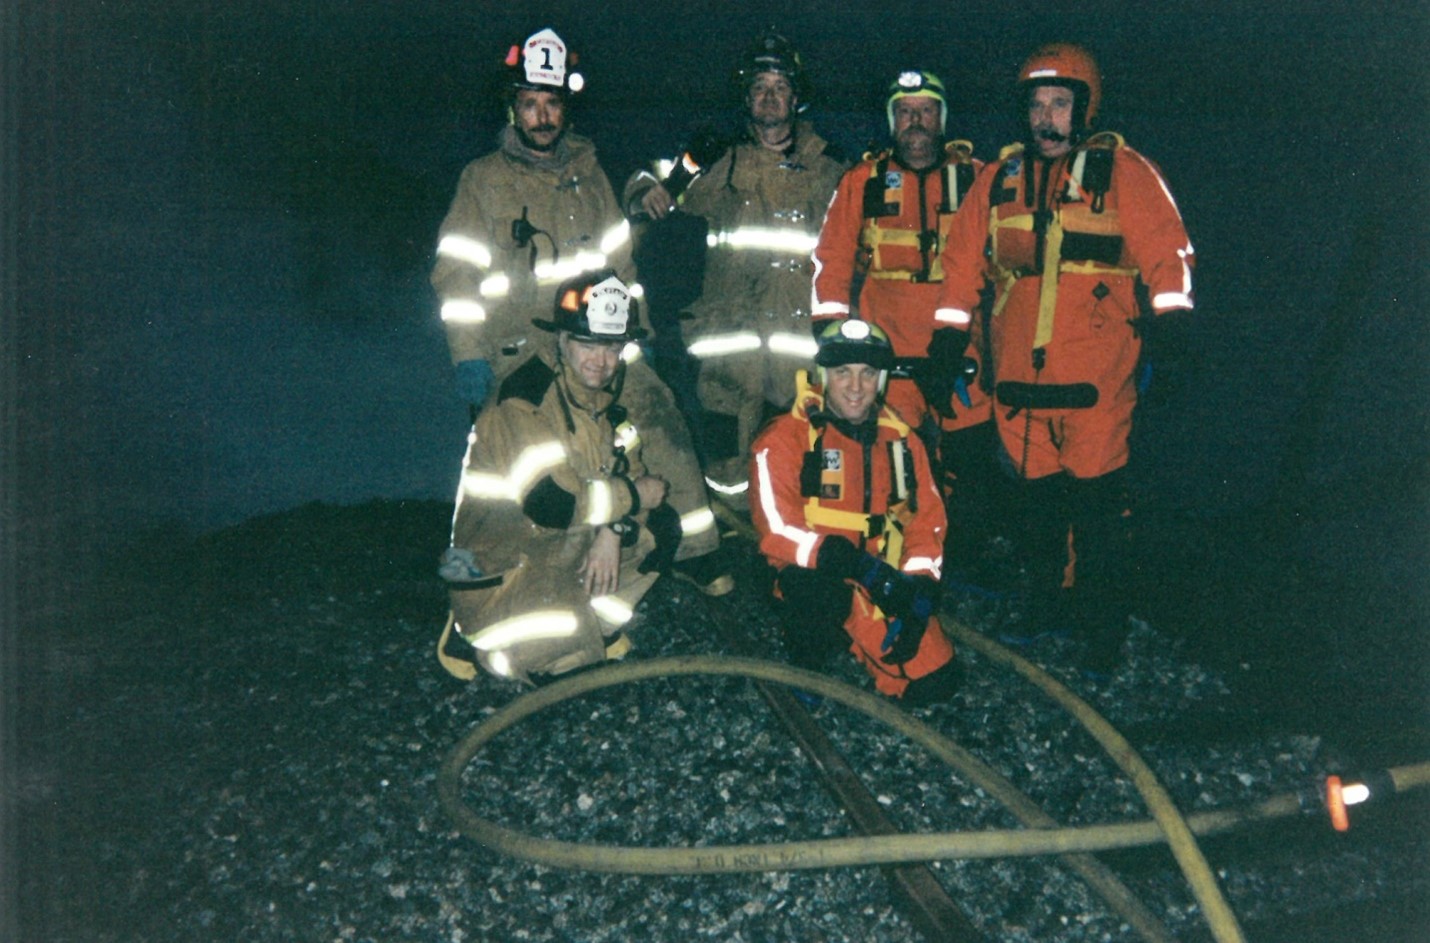 Five firefighters pose in front of smoke at night